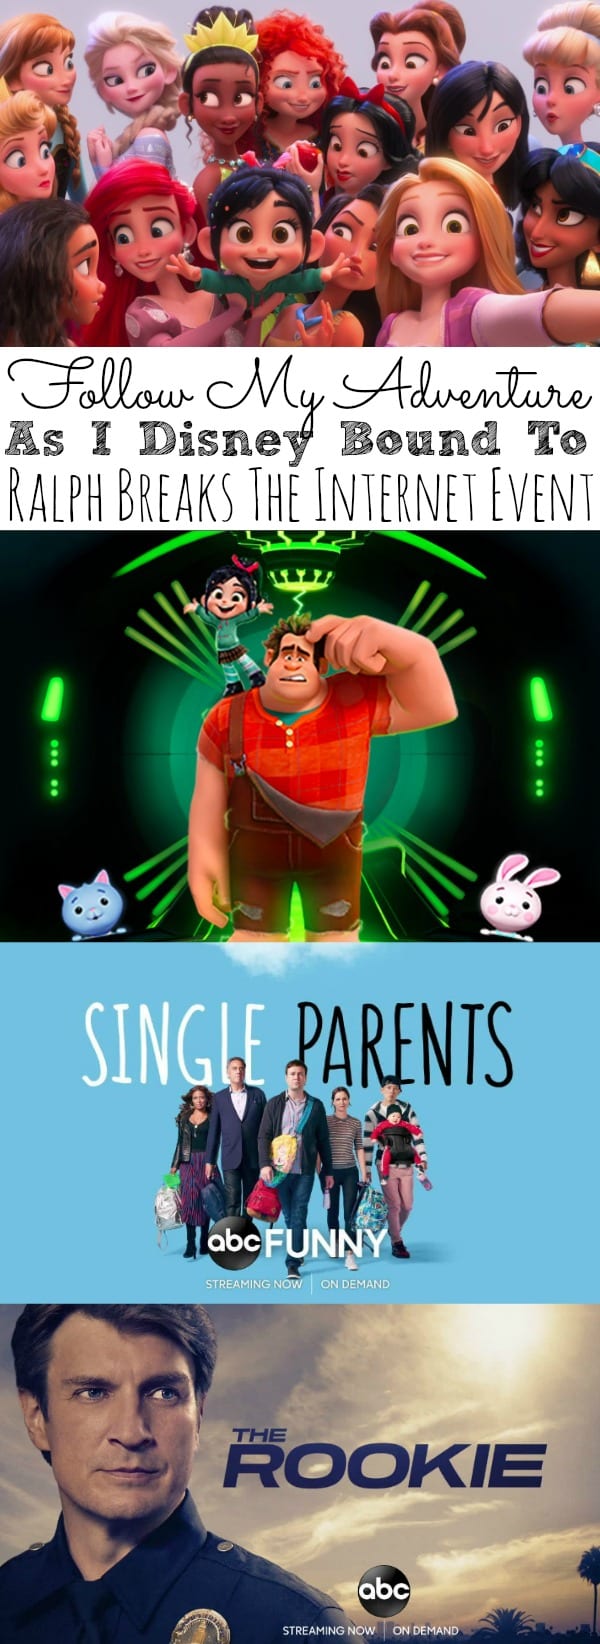 Follow Me As I Attend Ralph Breaks The Internet Event